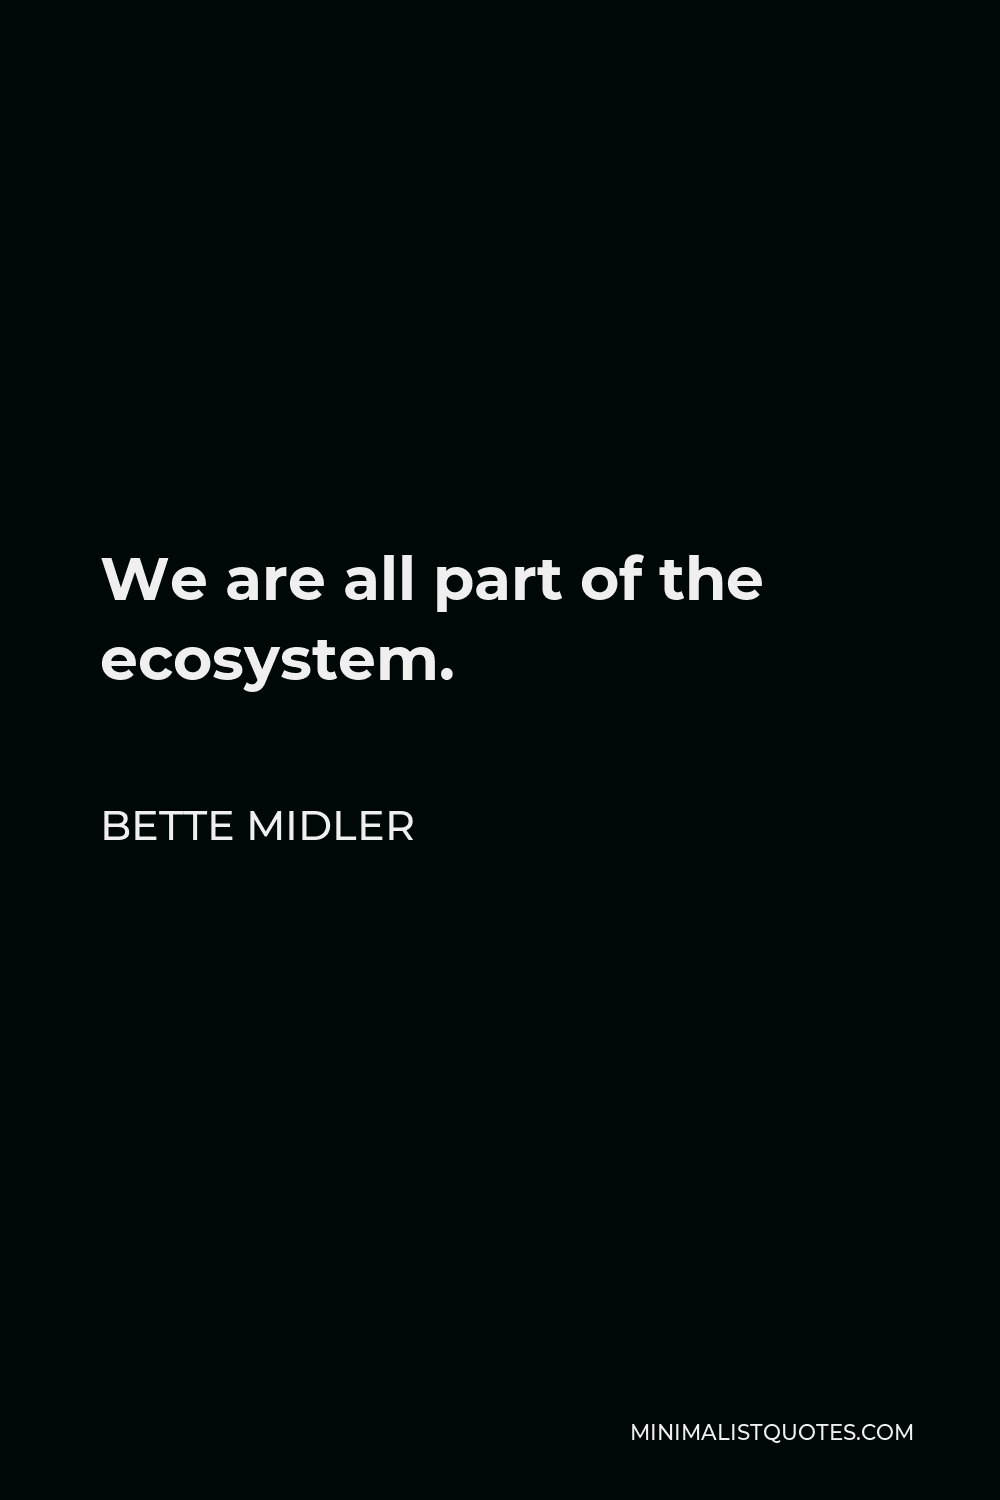 Bette Midler Quote - We are all part of the ecosystem.